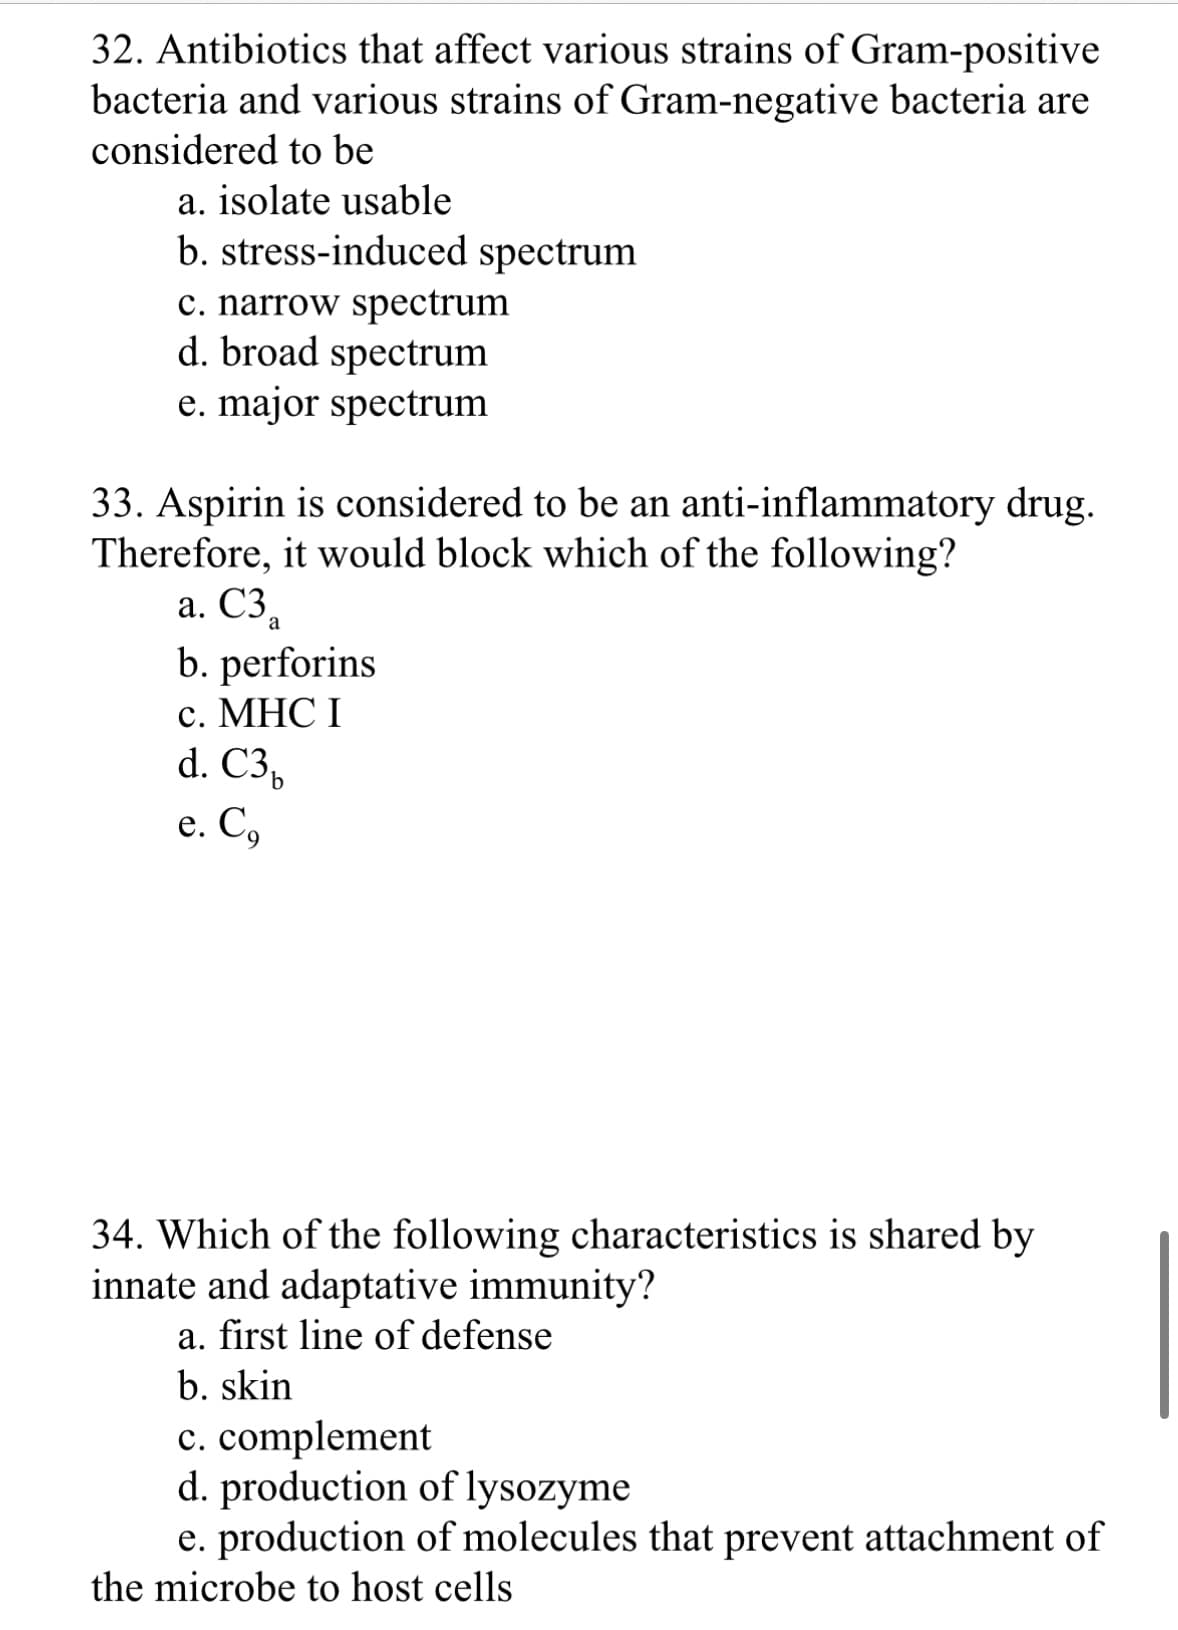 32. Antibiotics that affect various strains of Gram-positive
bacteria and various strains of Gram-negative bacteria are
considered to be
a. isolate usable
b. stress-induced spectrum
c. narrow spectrum
d. broad spectrum
e. major spectrum
33. Aspirin is considered to be an anti-inflammatory drug.
Therefore, it would block which of the following?
a. C3₂
b. perforins
c. MHC I
d. C3,
e. Co
34. Which of the following characteristics is shared by
innate and adaptative immunity?
a. first line of defense
b. skin
c. complement
d. production of lysozyme
e. production of molecules that prevent attachment of
the microbe to host cells